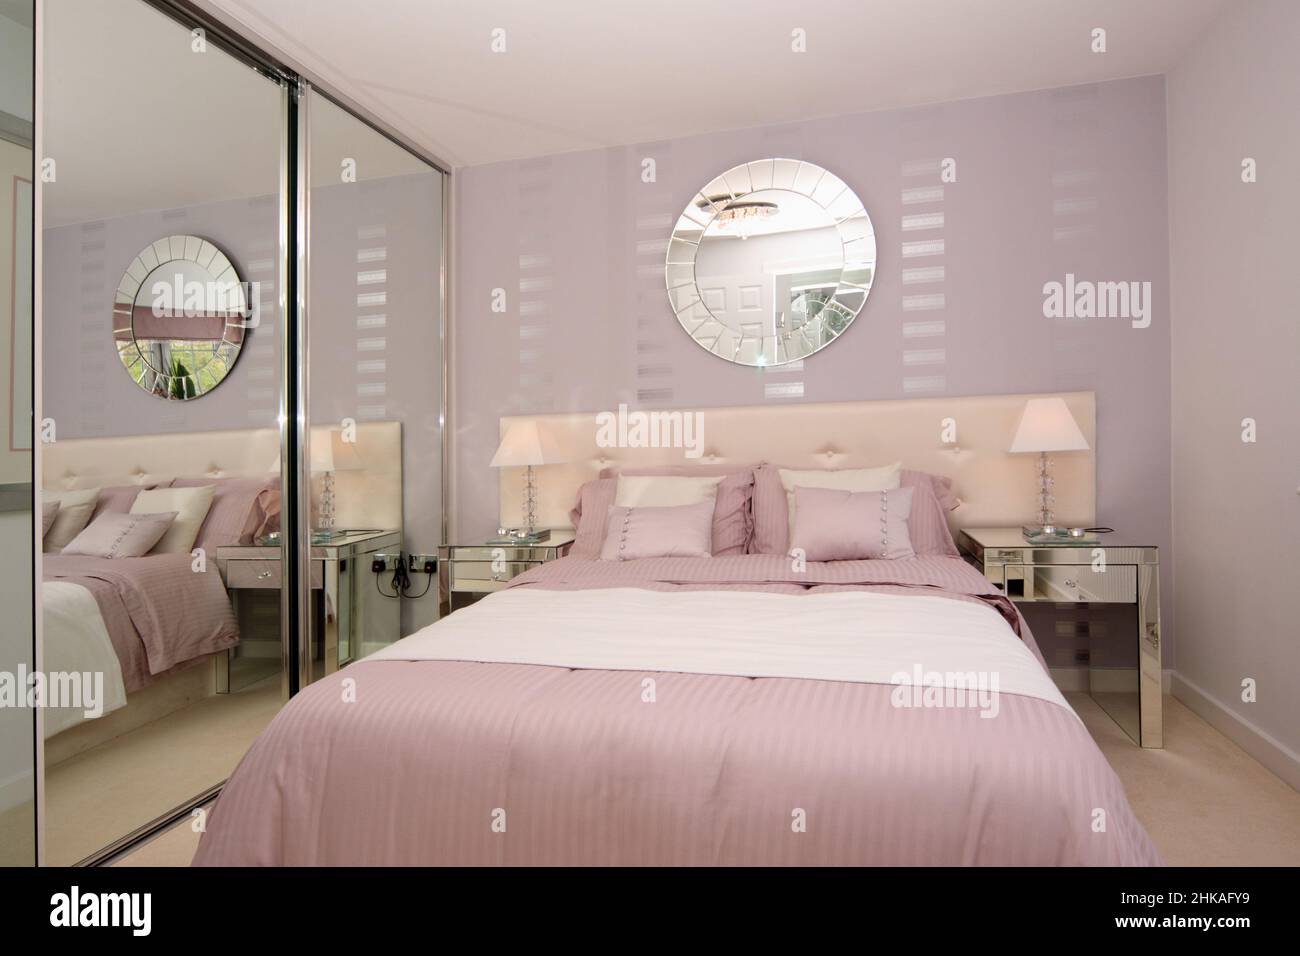 Bedroom in muted pink and white colour color scheme, feature wall,bedside lights,cushions,mirror on wall, padded headboard,mirrored wardrobes Stock Photo